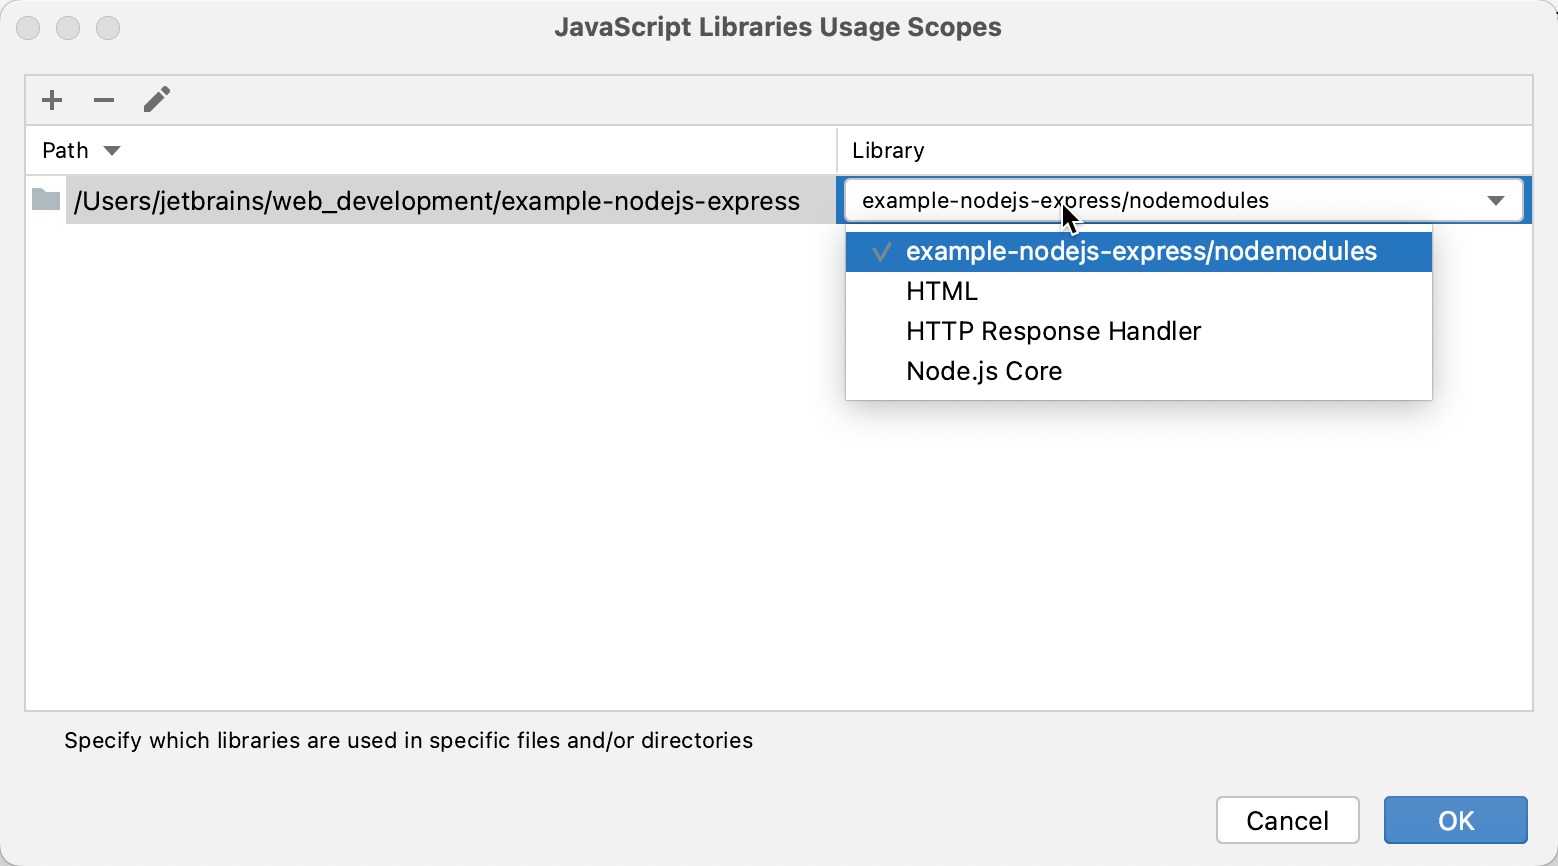 Configure the scope of a library